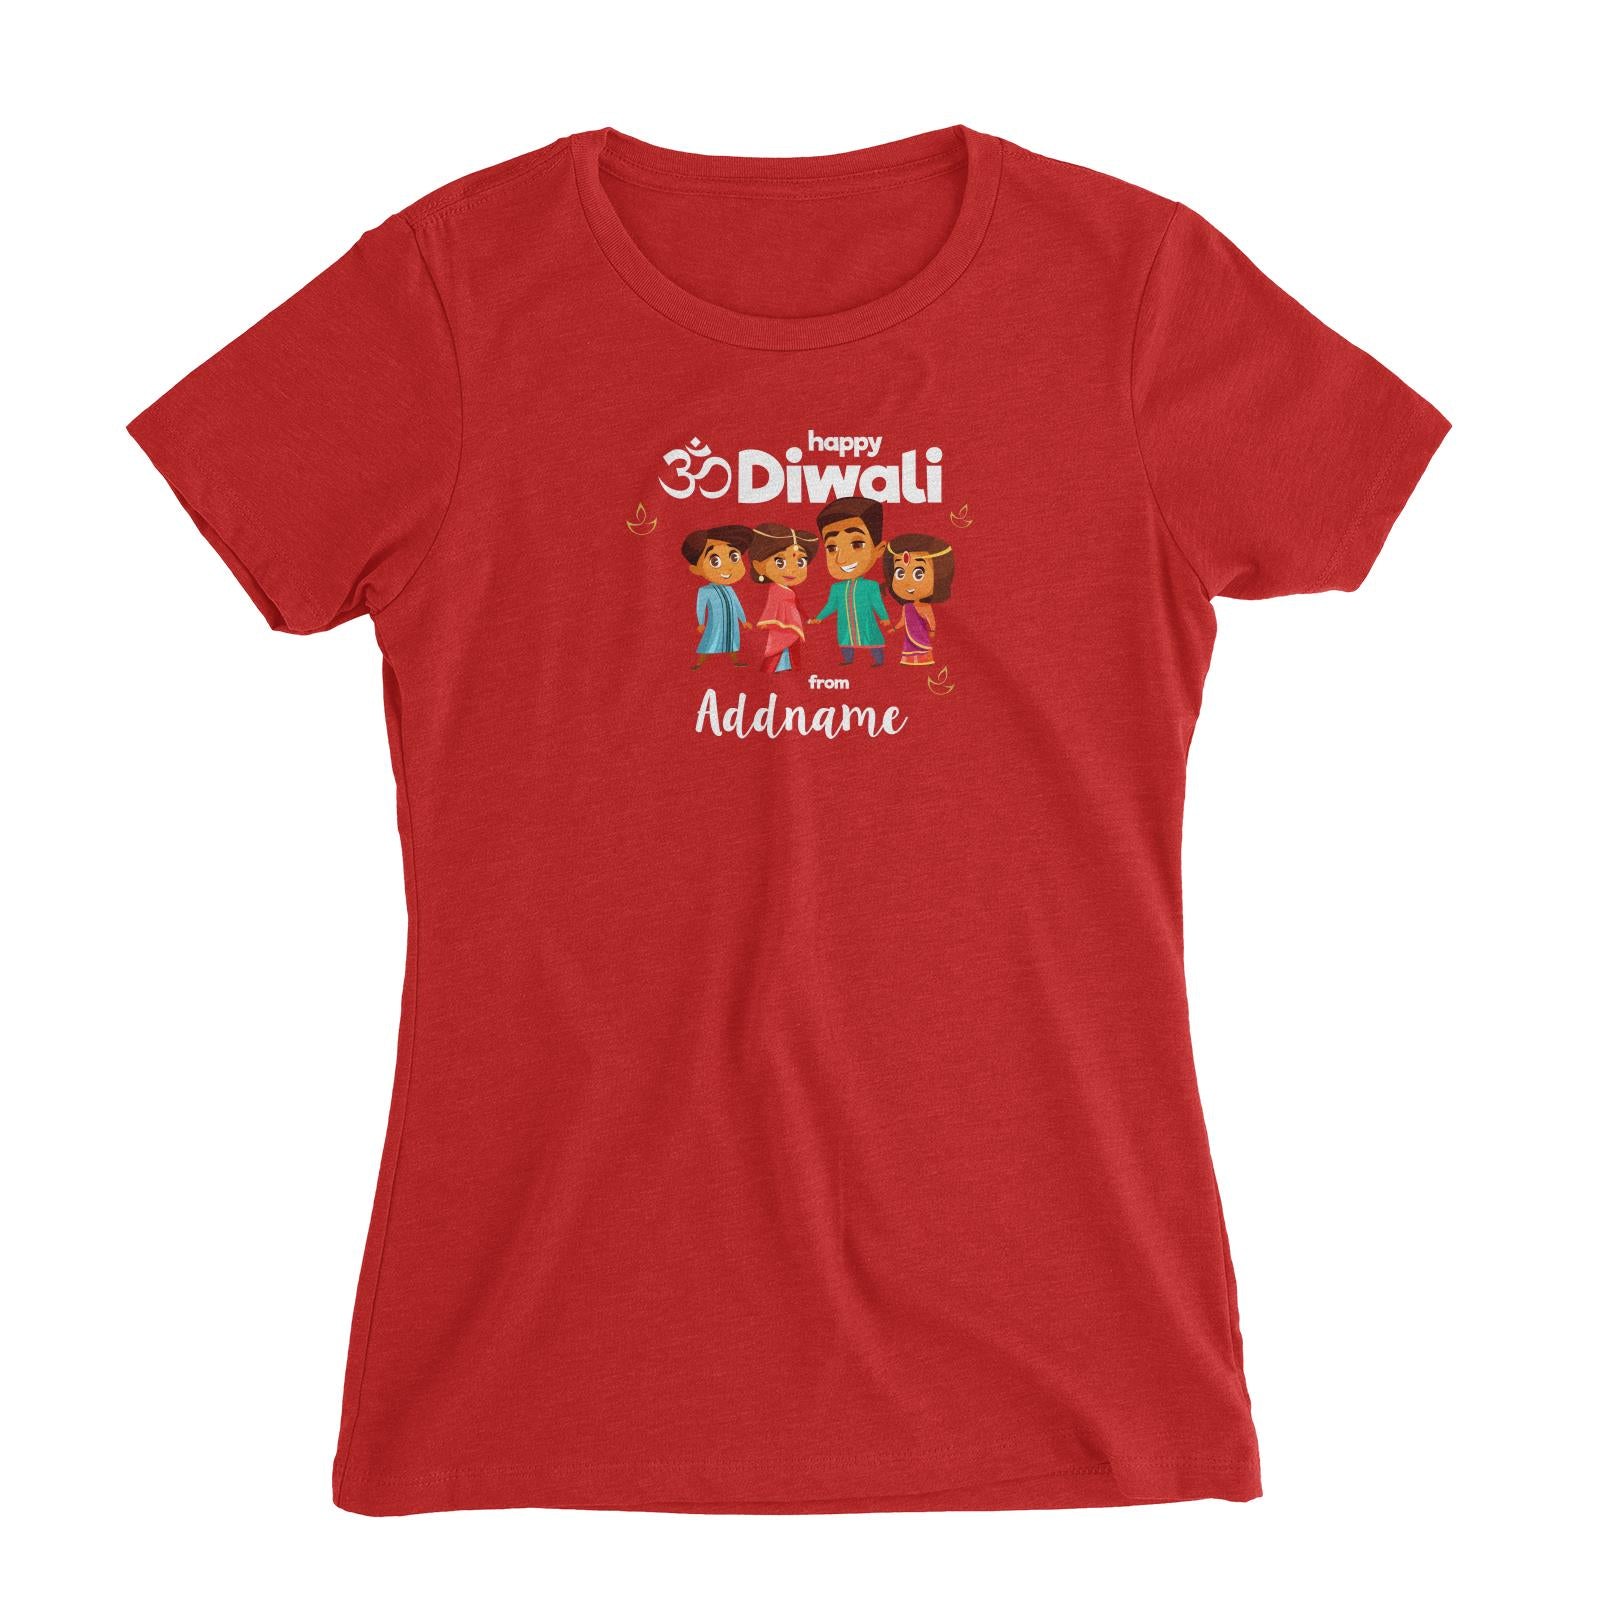 Cute Family Of Four OM Happy Diwali From Addname Women's Slim Fit T-Shirt